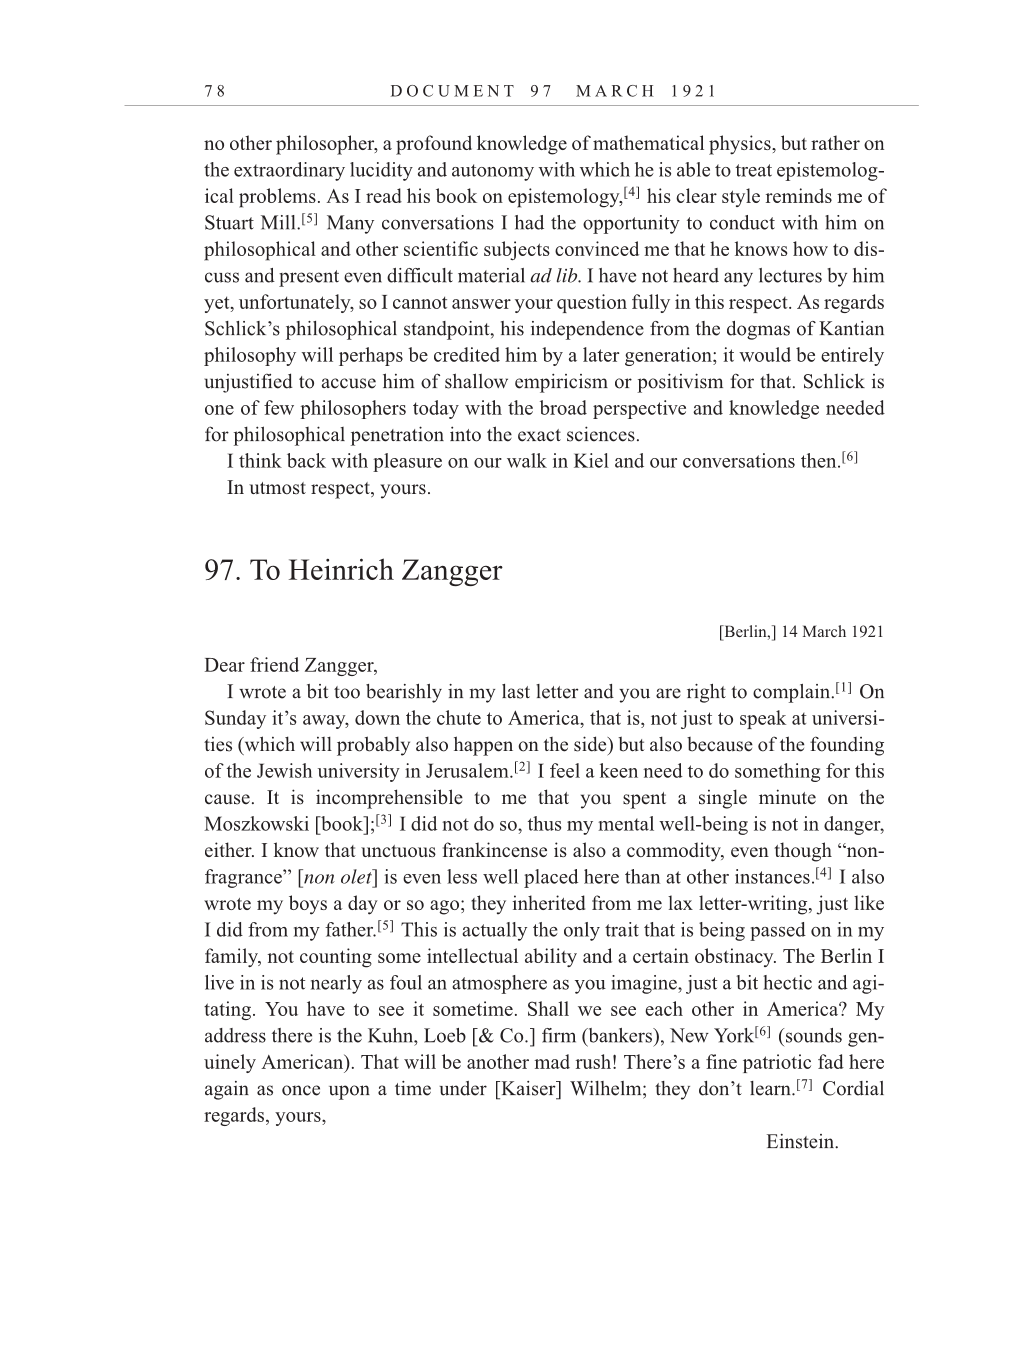 Volume 12: The Berlin Years: Correspondence, January-December 1921 (English translation supplement) page 78